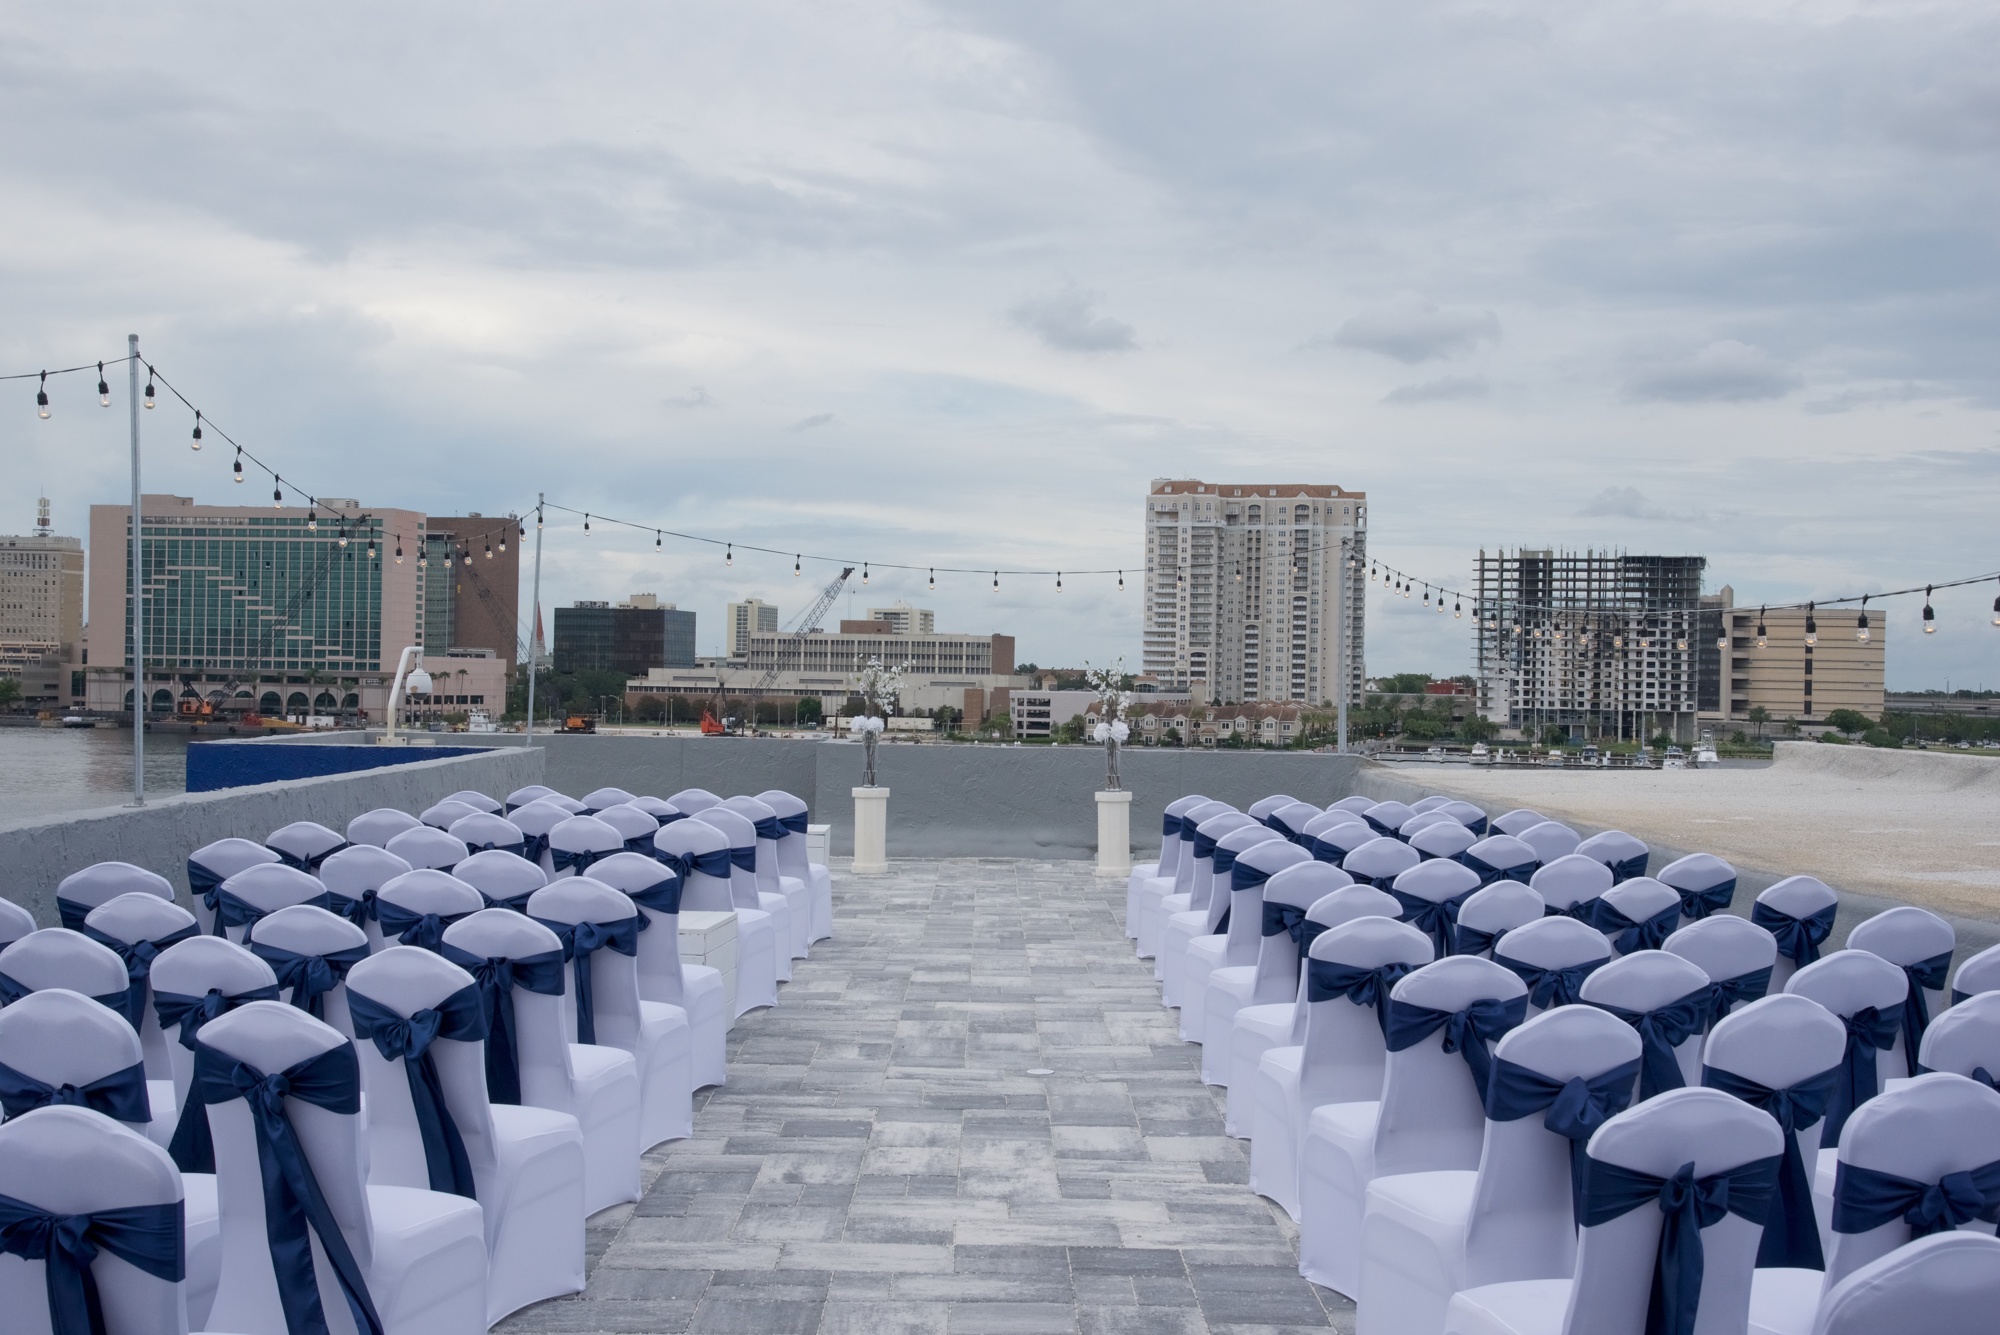 The outdoor patio on the fifth floor outside Topsider can be a venue for special events, such as weddings.